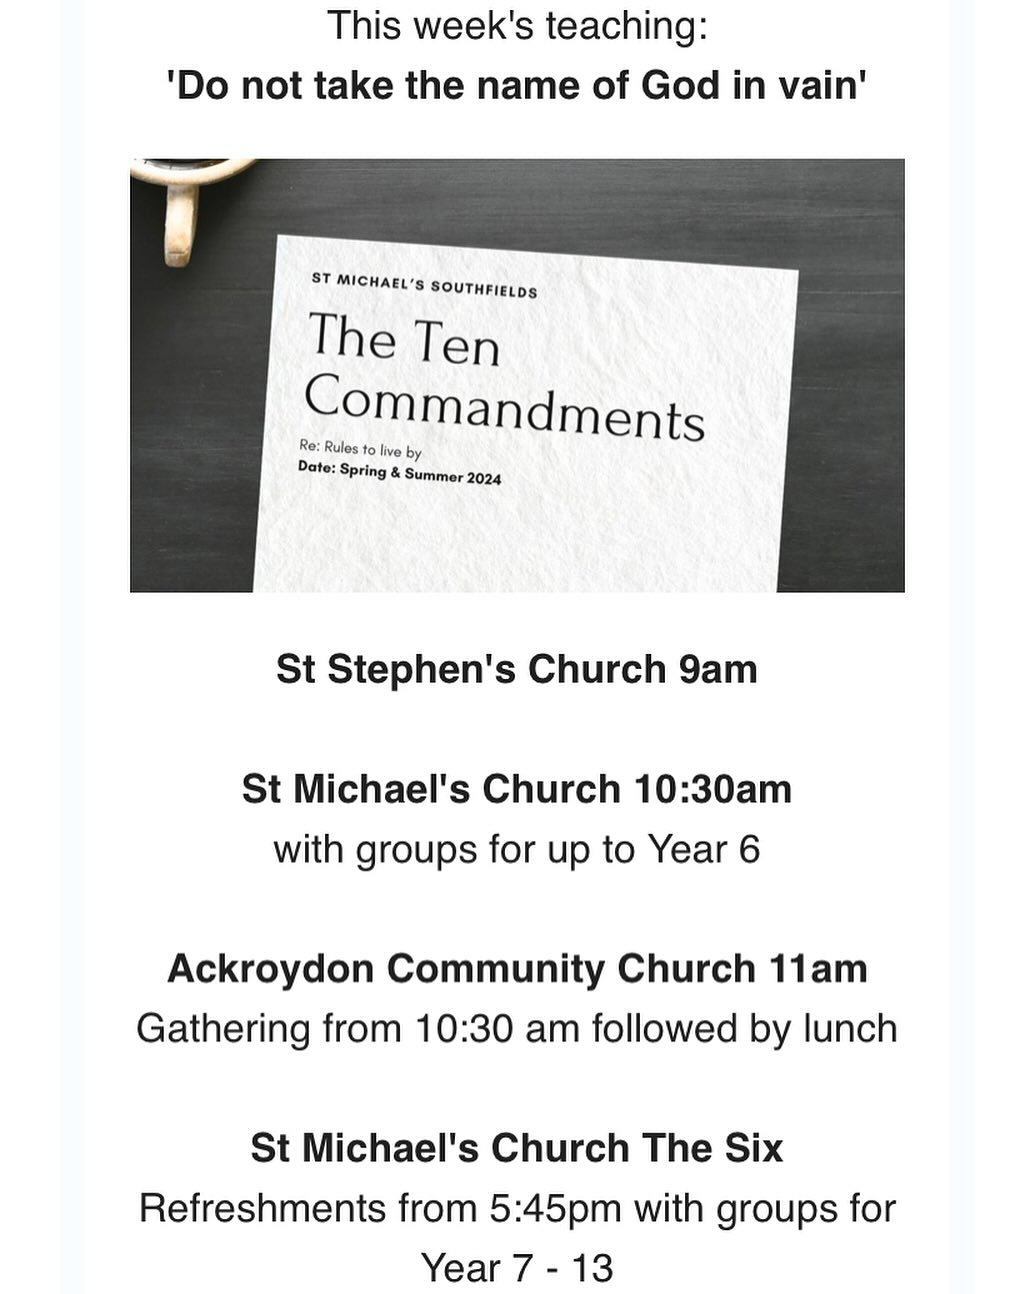 We look forward to seeing you at our services this Sunday - all welcome!
#church #familychurch #sw18 #southfields #churchofengland #dioceseofsouthwark #wandsworth